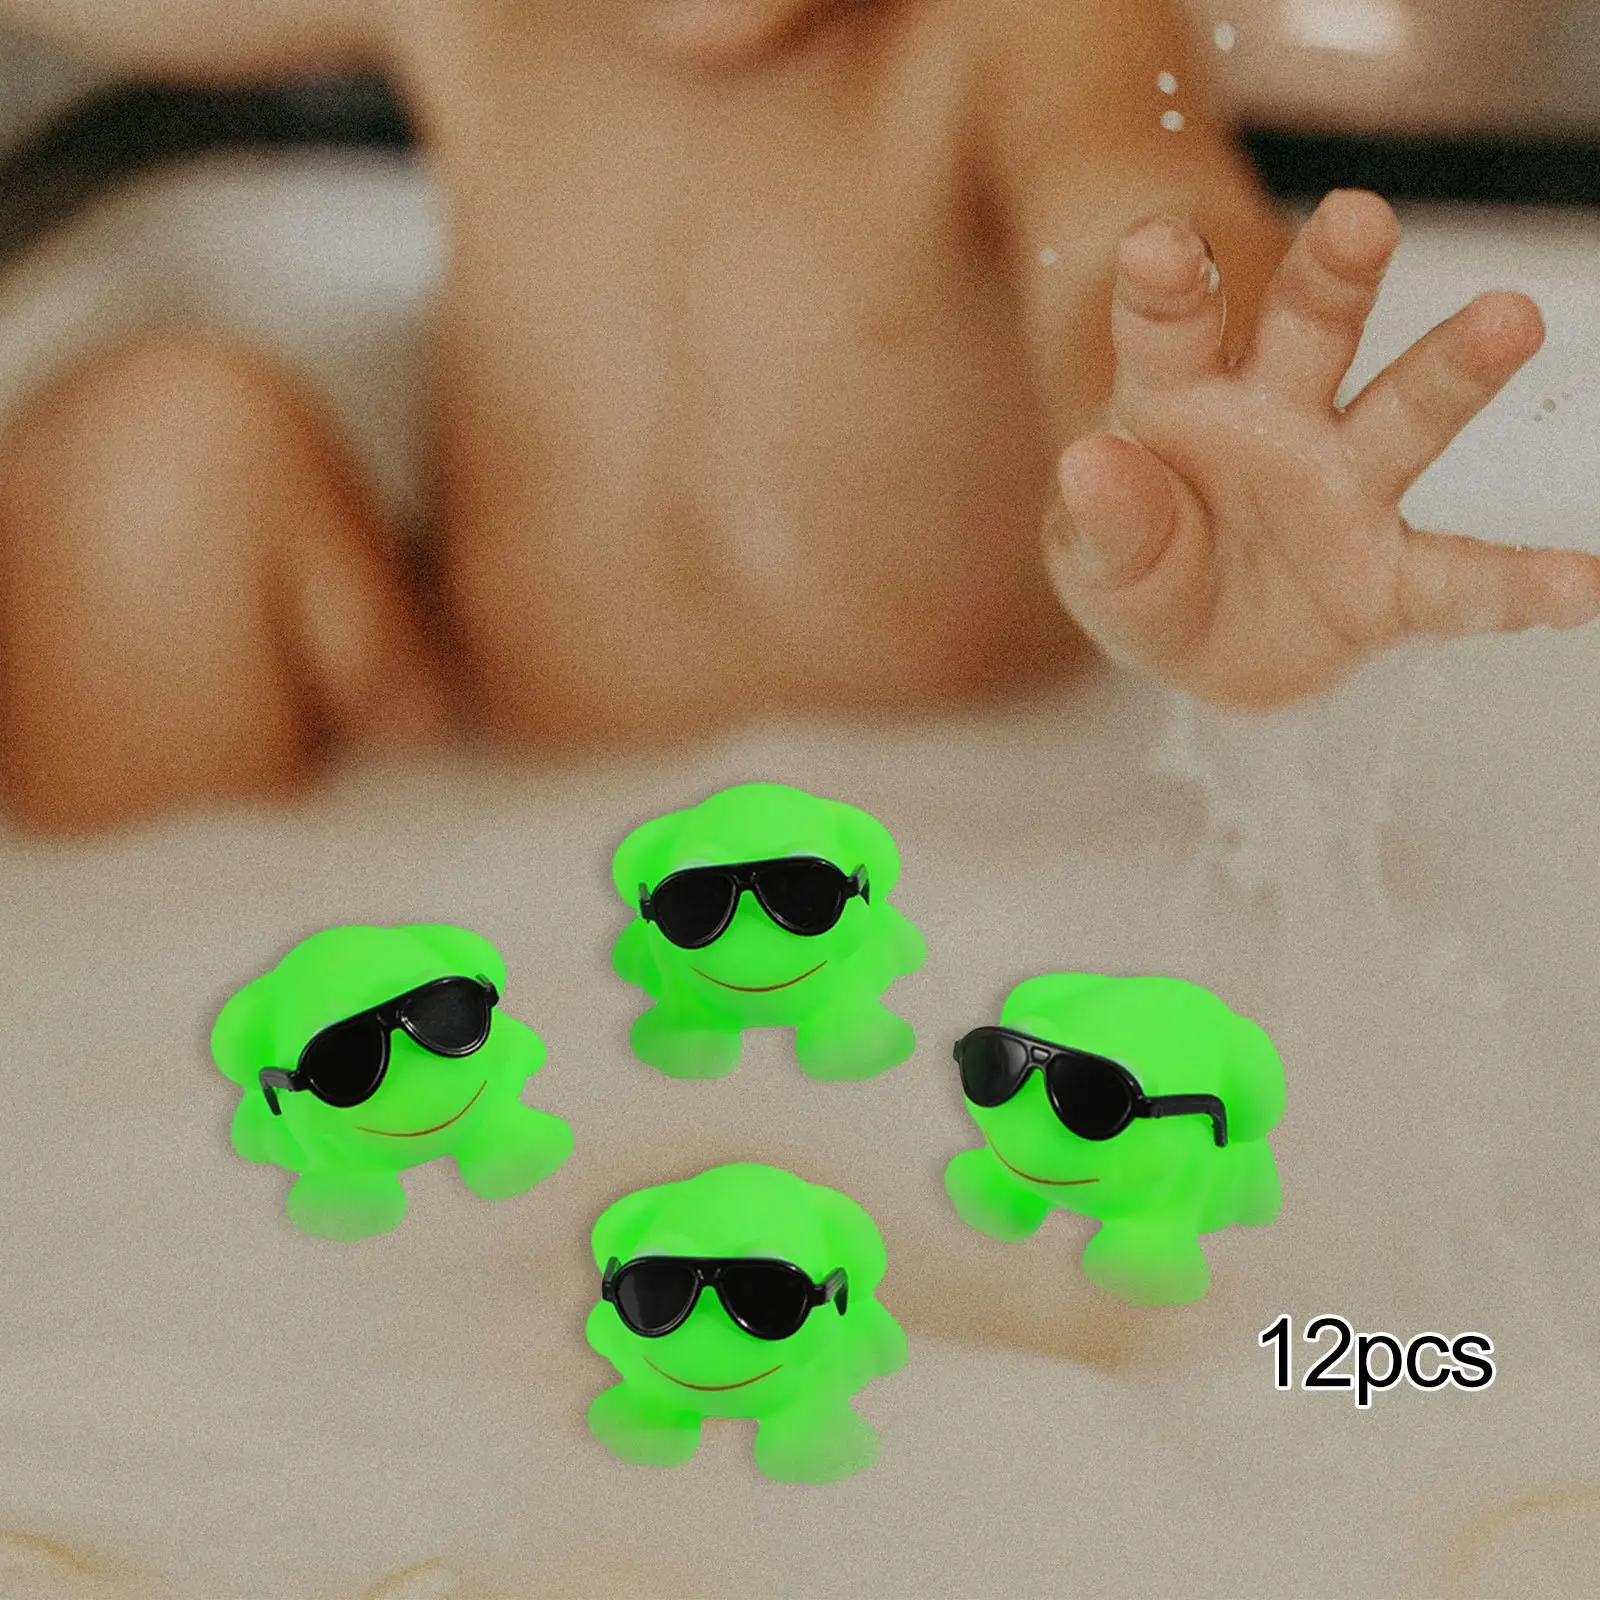 

12 Pieces Cute Squeaky Frogs Bathing Toy for Kids Birthday Gift Party Favors